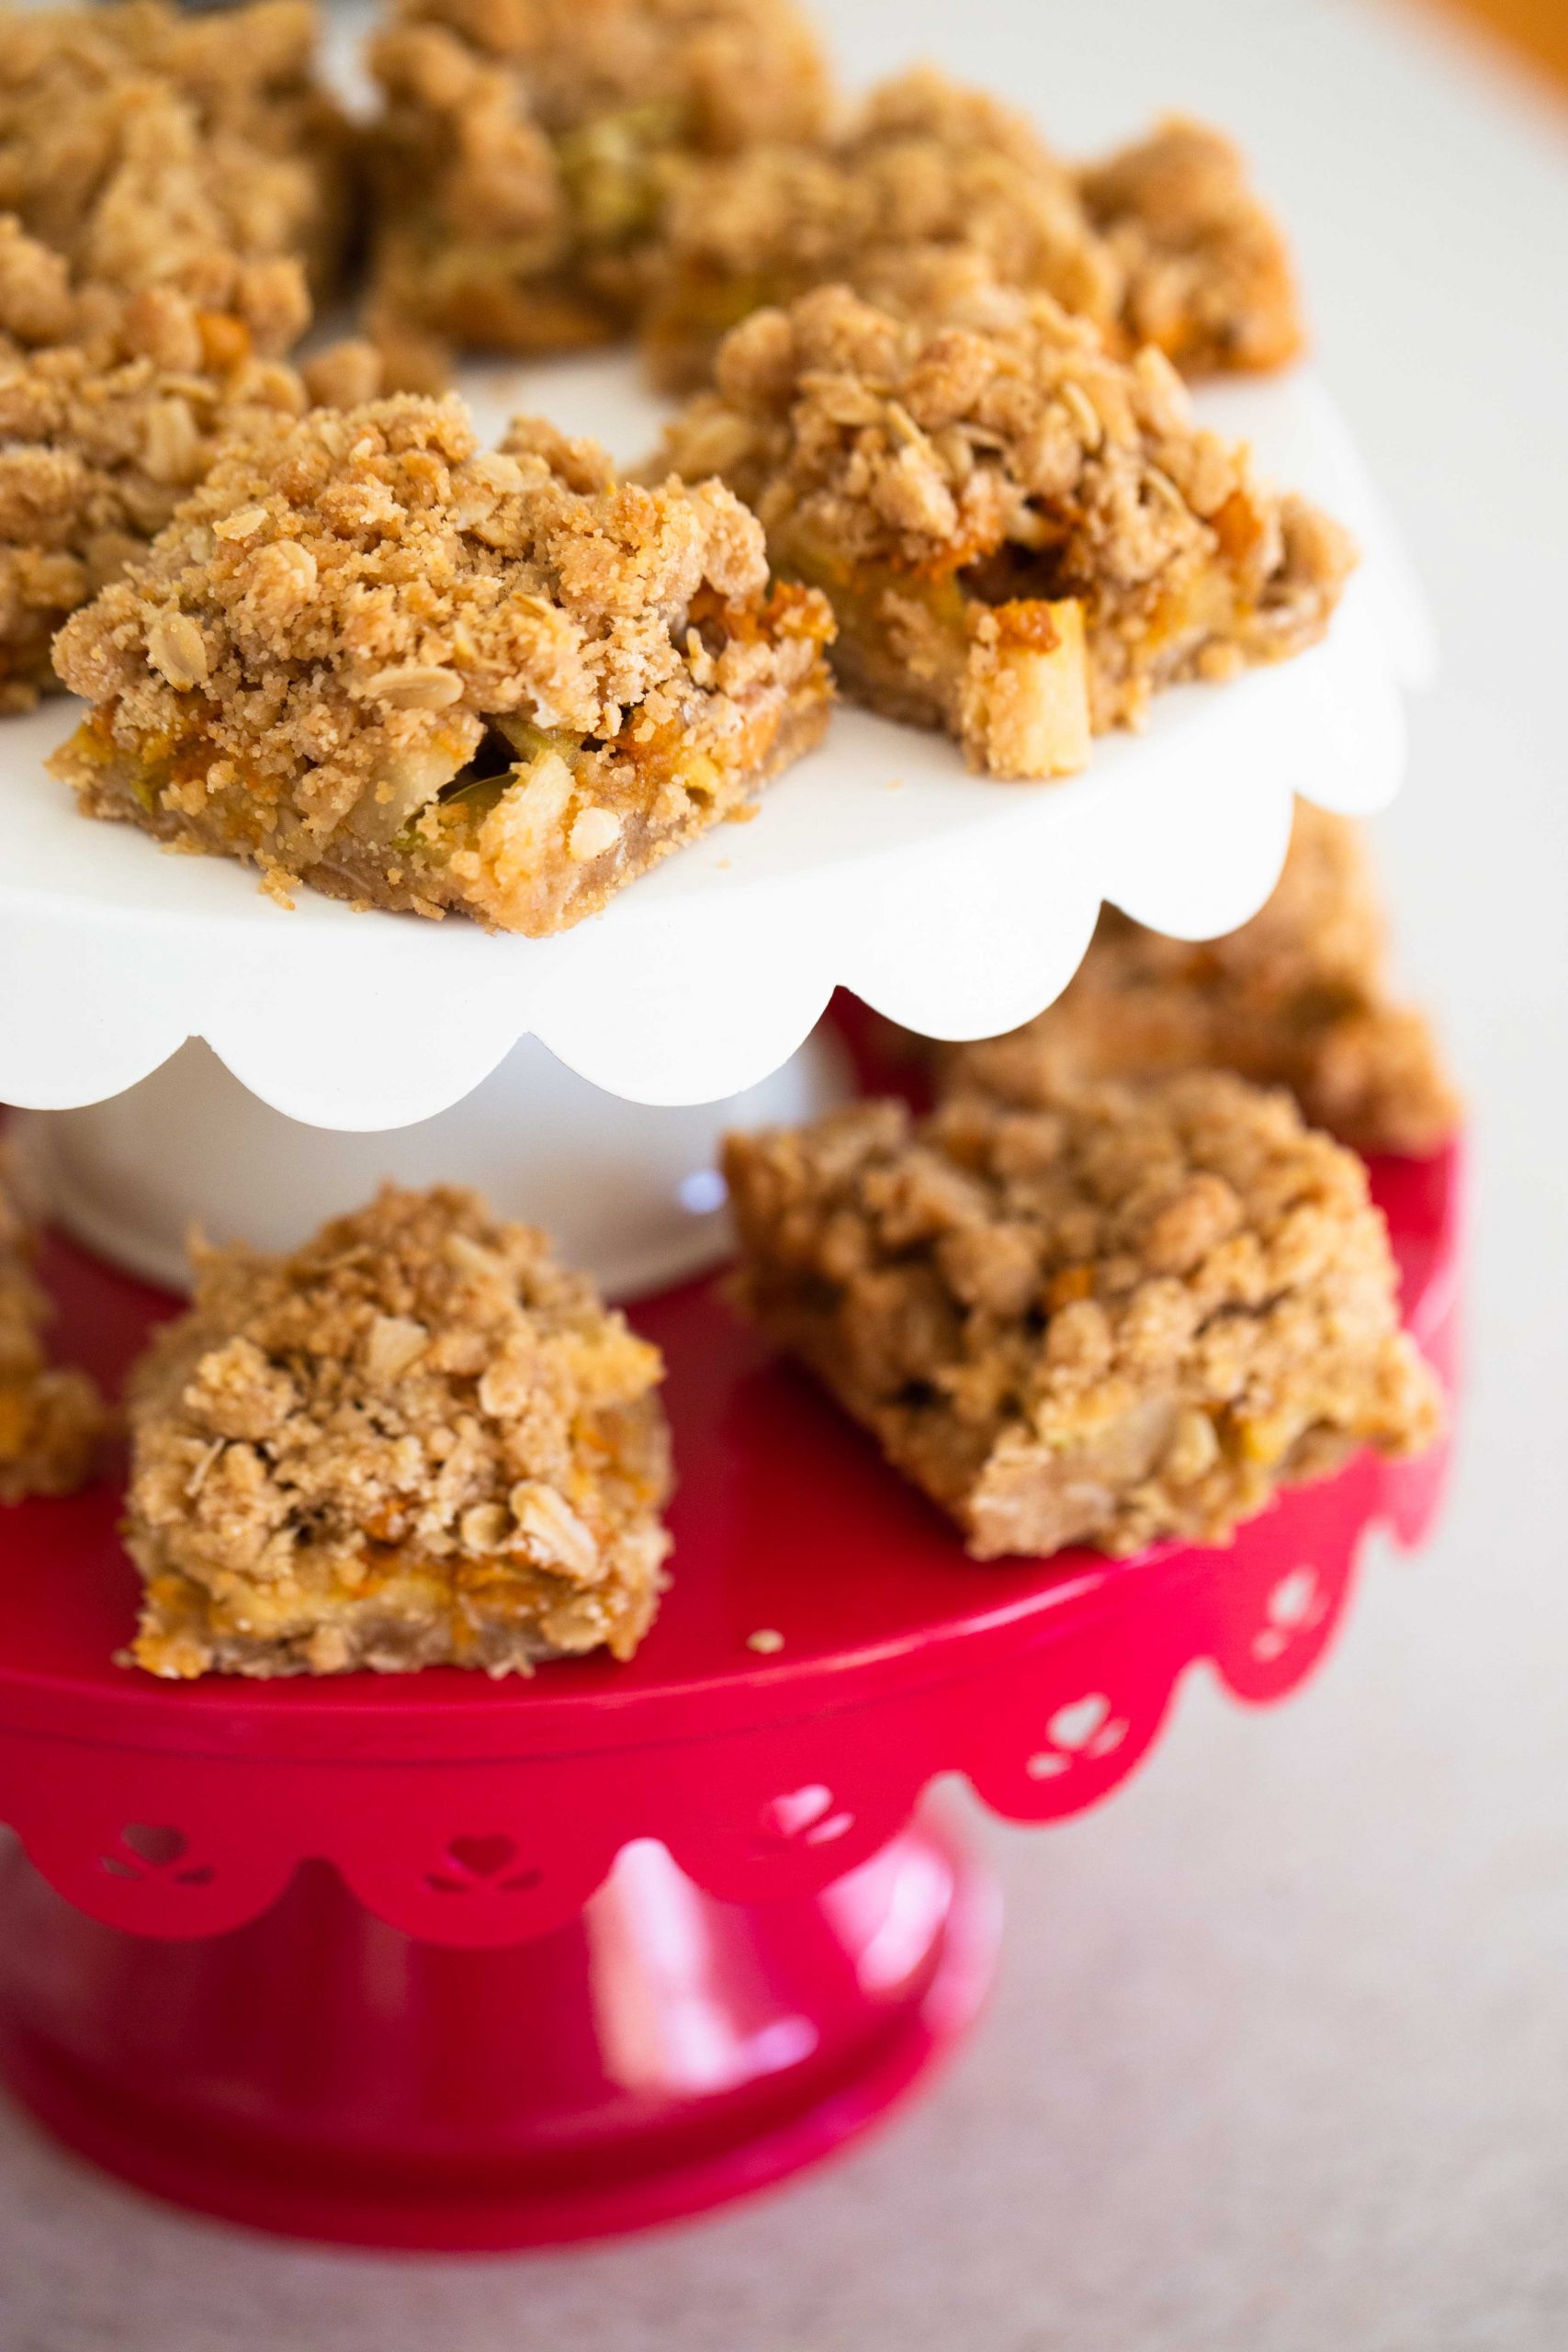 The tiered dessert stand has several squares of apple crisp bars ready for the party.